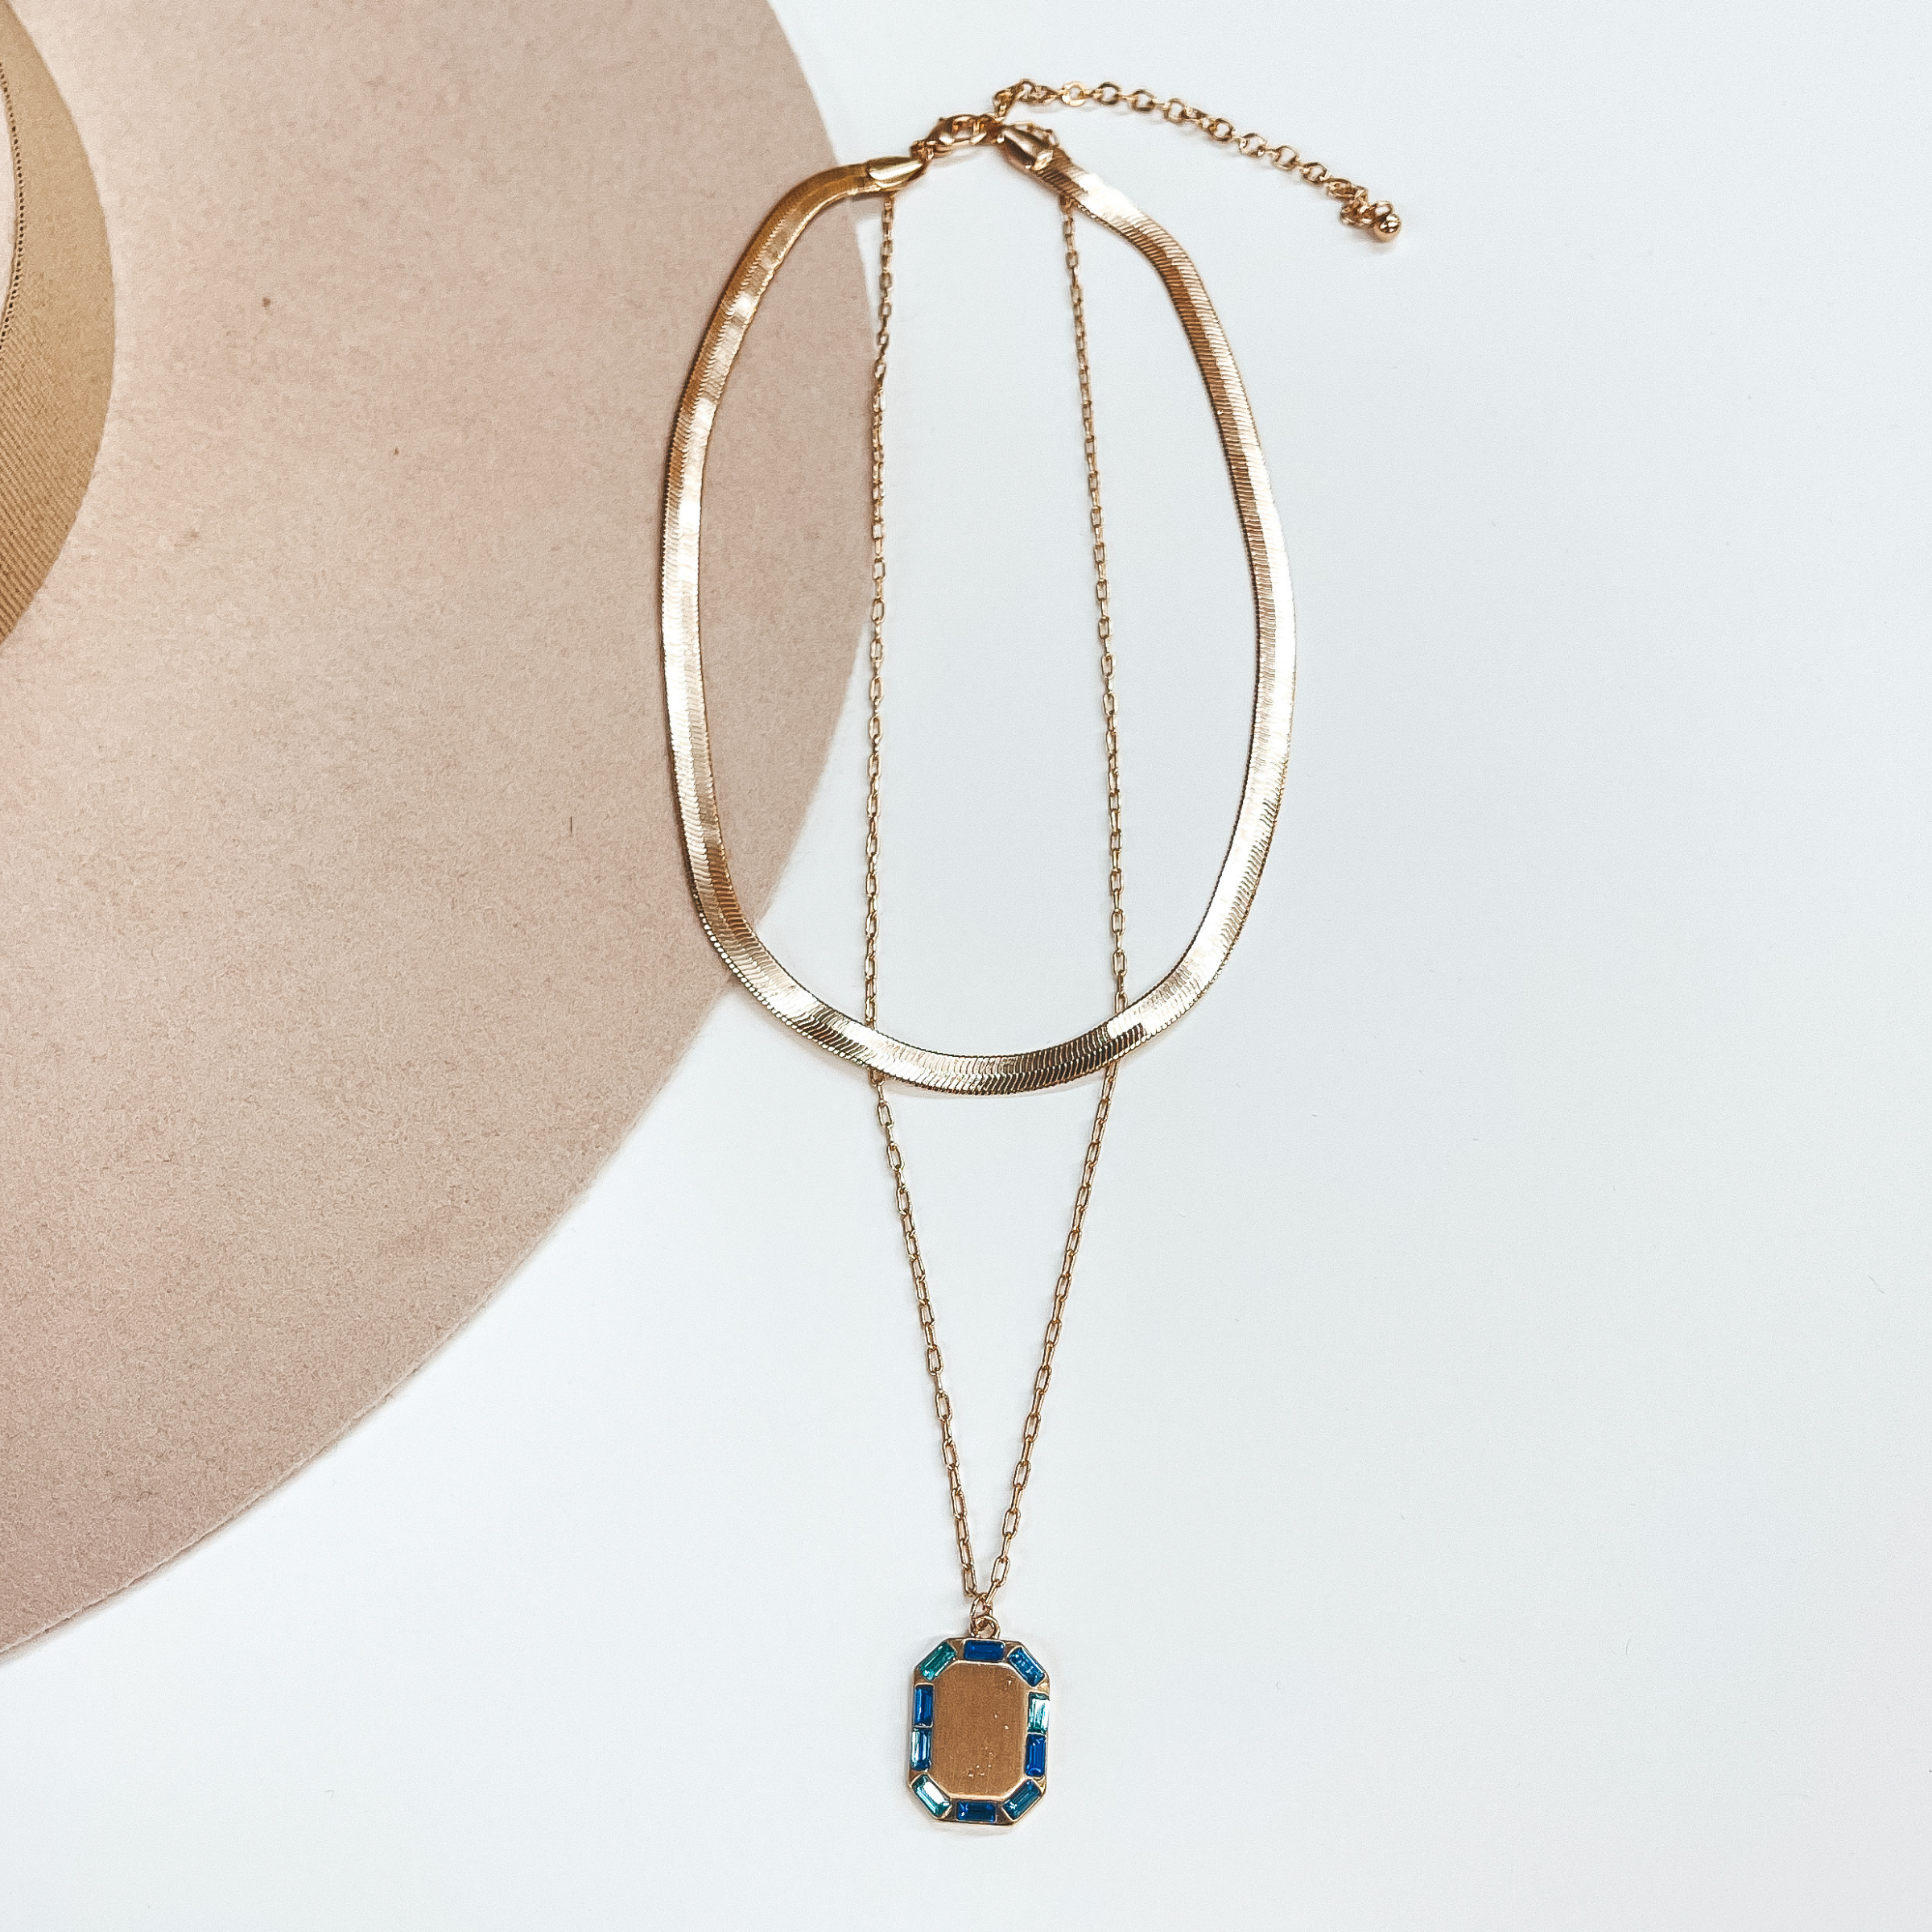 Gold double strand necklace, the small strand is a  snake chain and the longer strand is a regular  small chain. The longer strand has a rectangular gold  pendant with crystals around in blue, light blue,  and teal. This necklace is pictured on a white and  beige background.